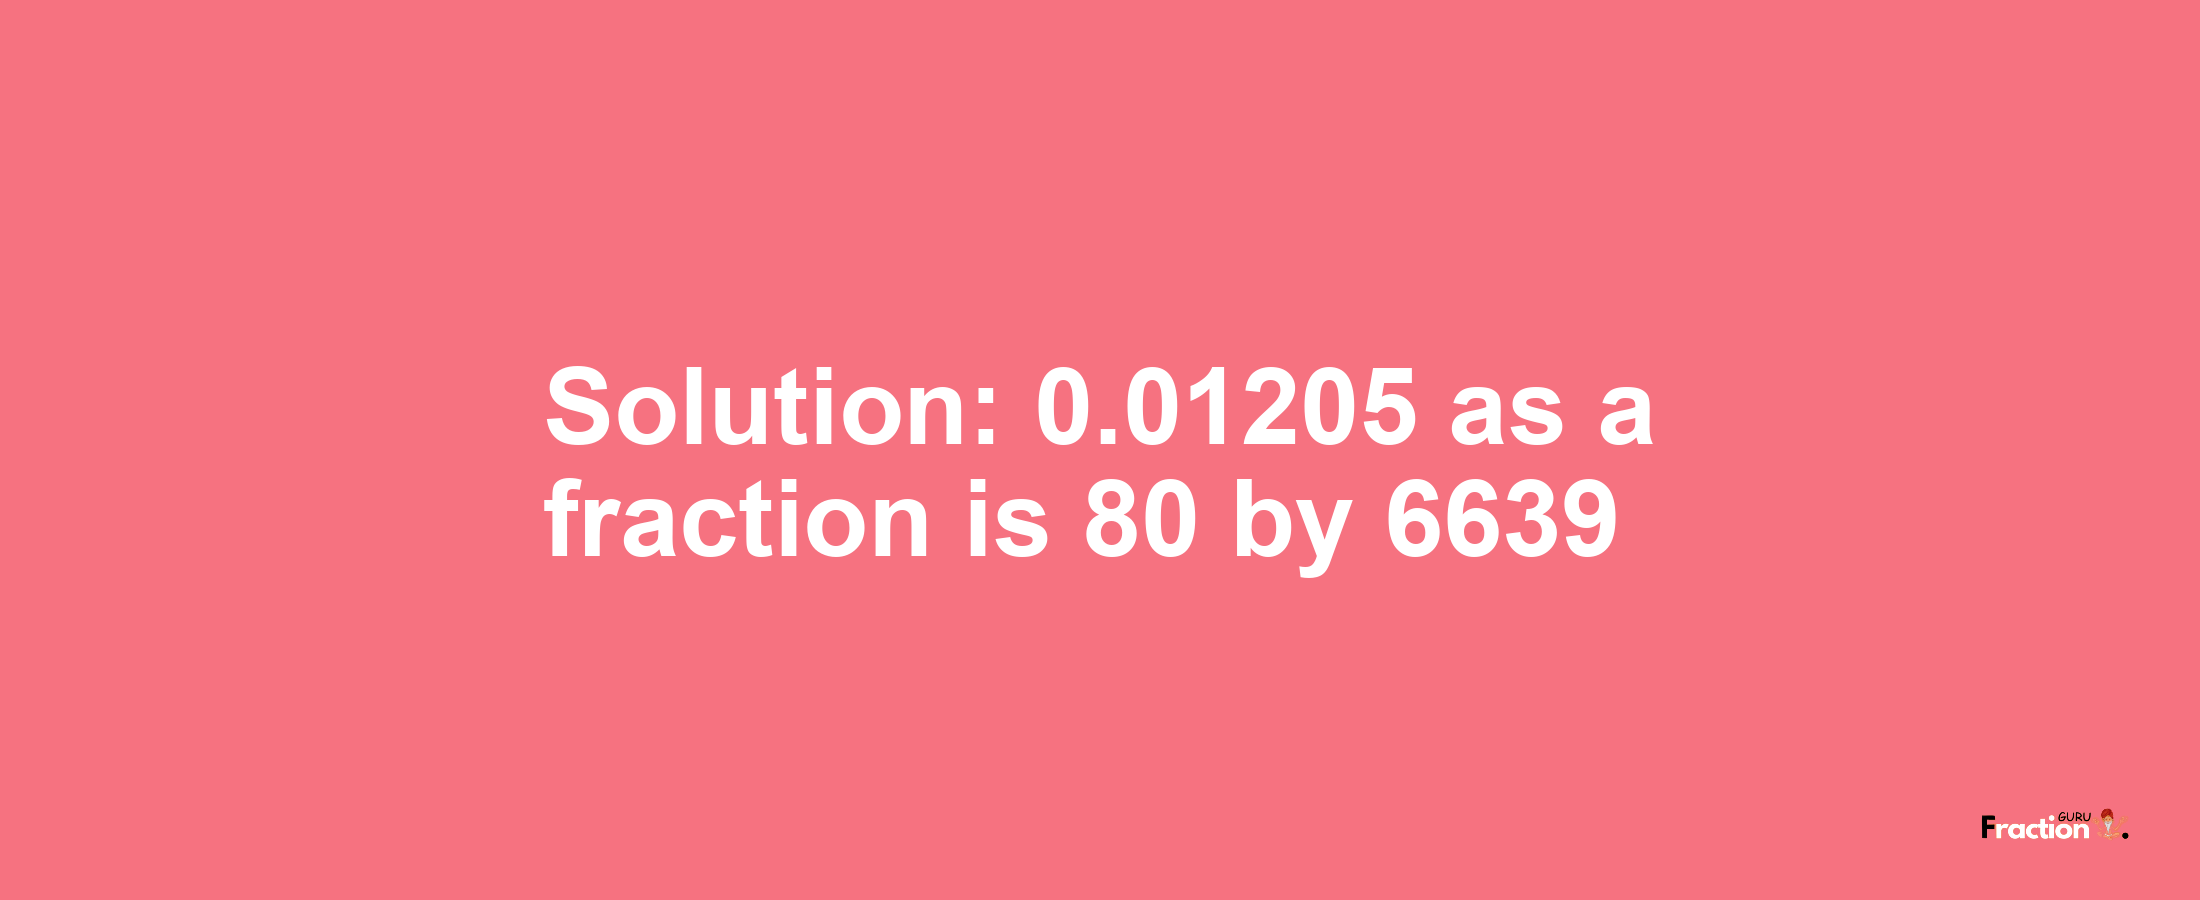 Solution:0.01205 as a fraction is 80/6639